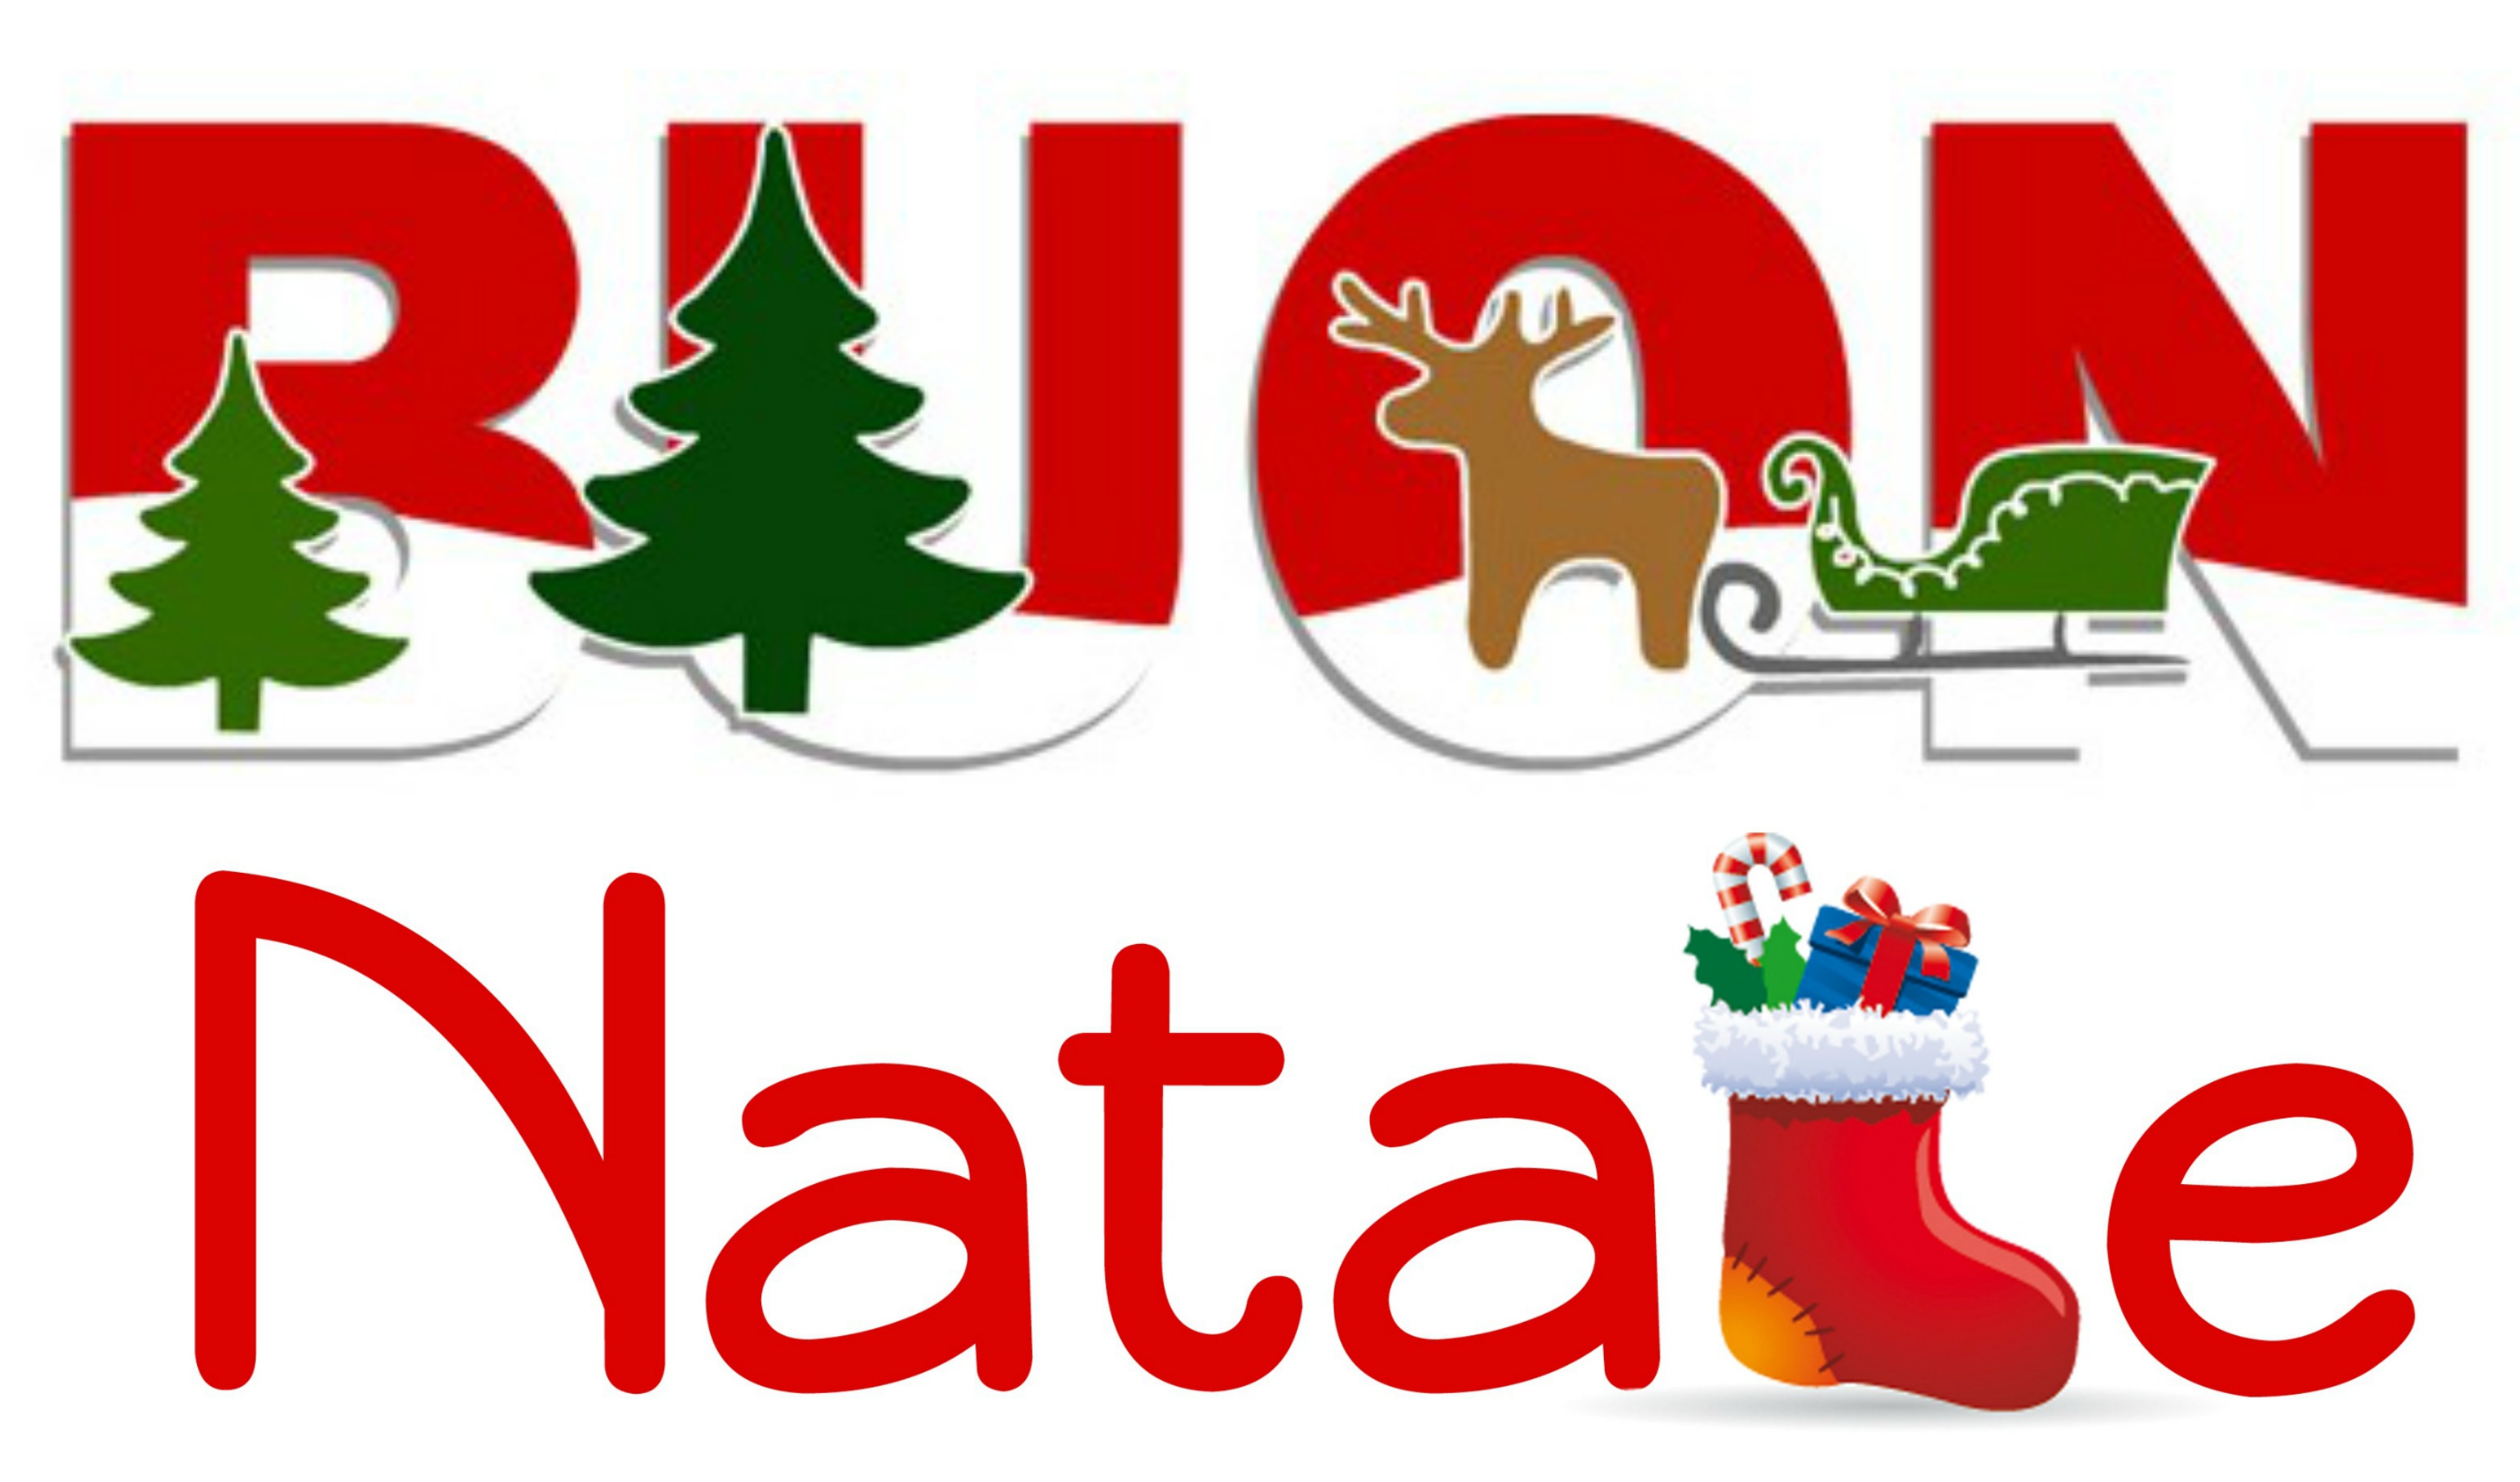 Buon Natale Images.Buon Natale Smile Laugh Travel Love Be Yourself Enjoy Life